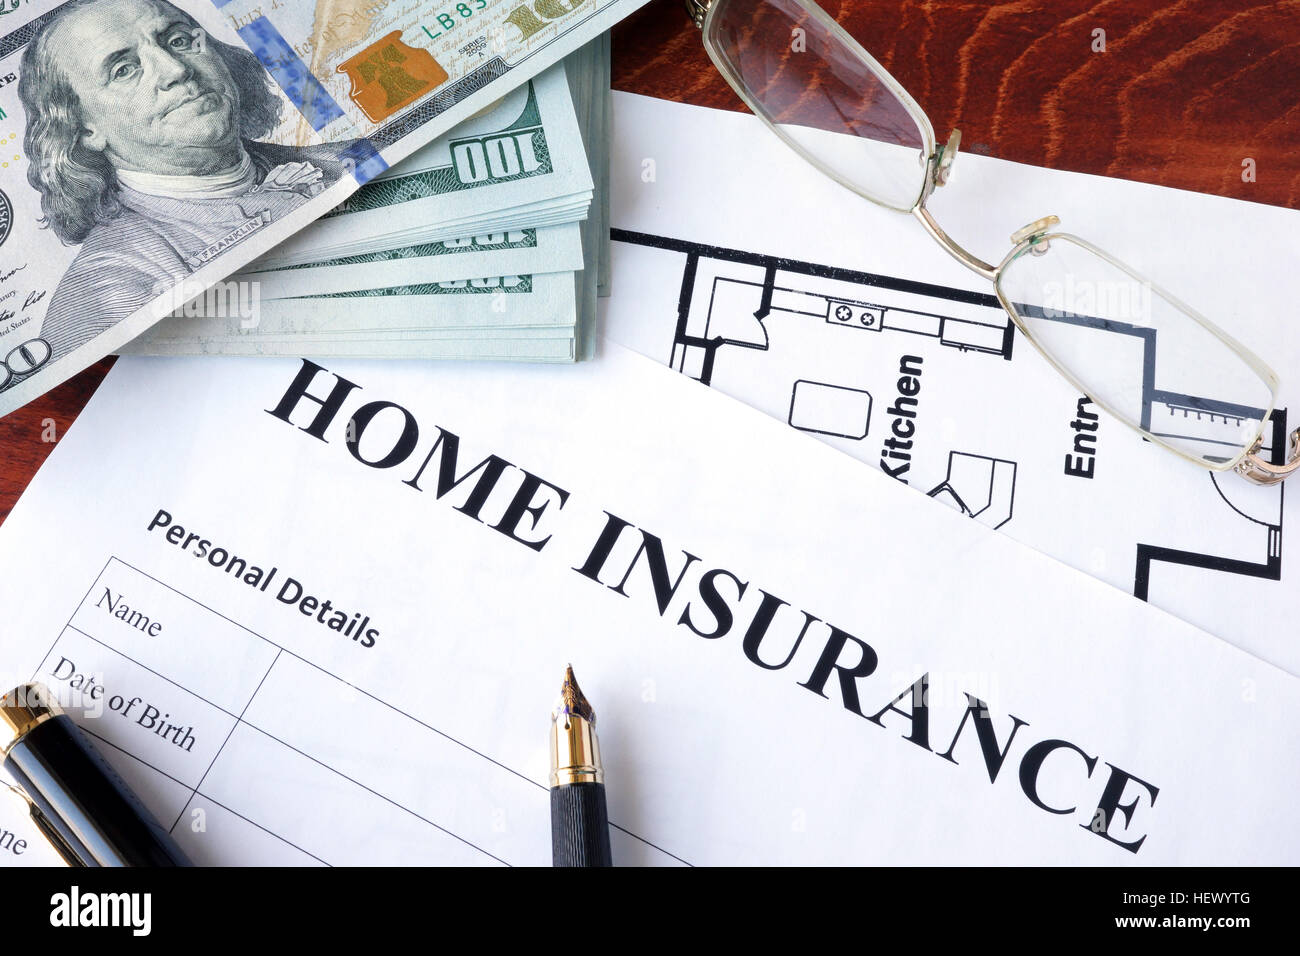 Home insurance policy on a wooden surface. Stock Photo